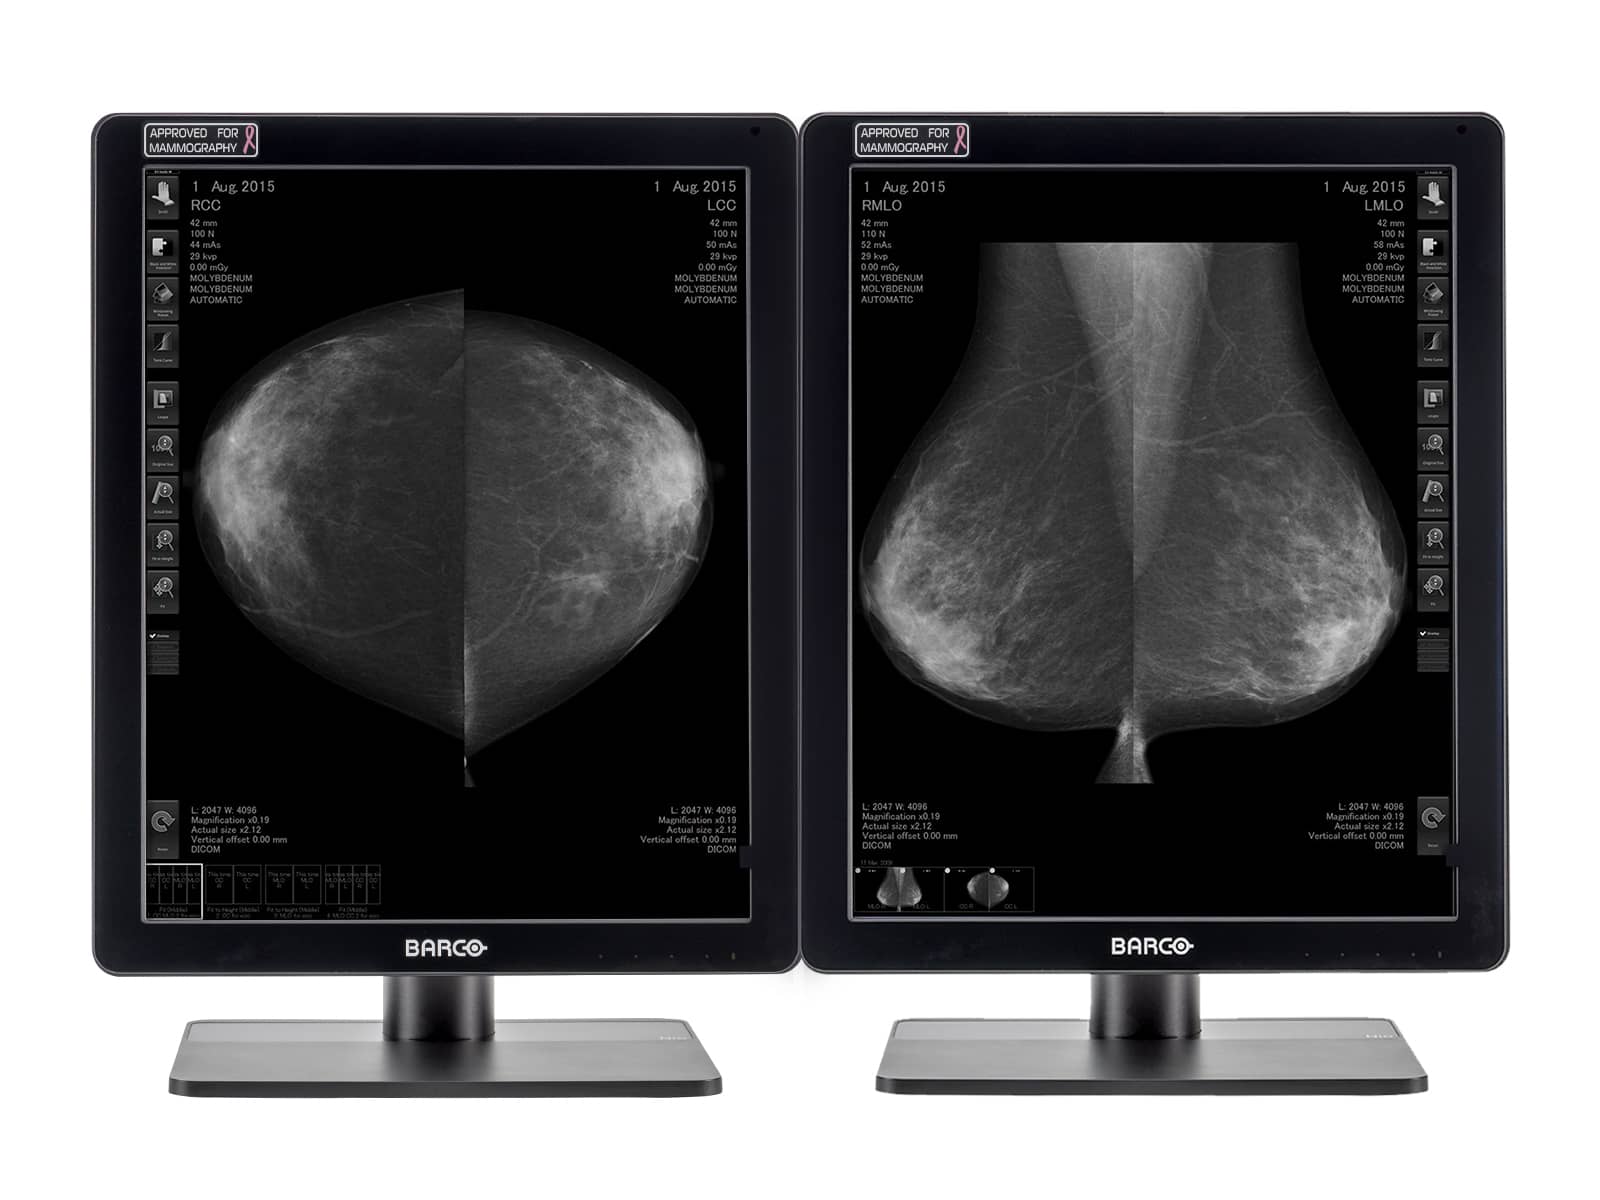 Barco Coronis MDCG-5221 5MP 21" Grayscale LED Mammo 3D-DBT Breast Imaging Display Monitors.com 